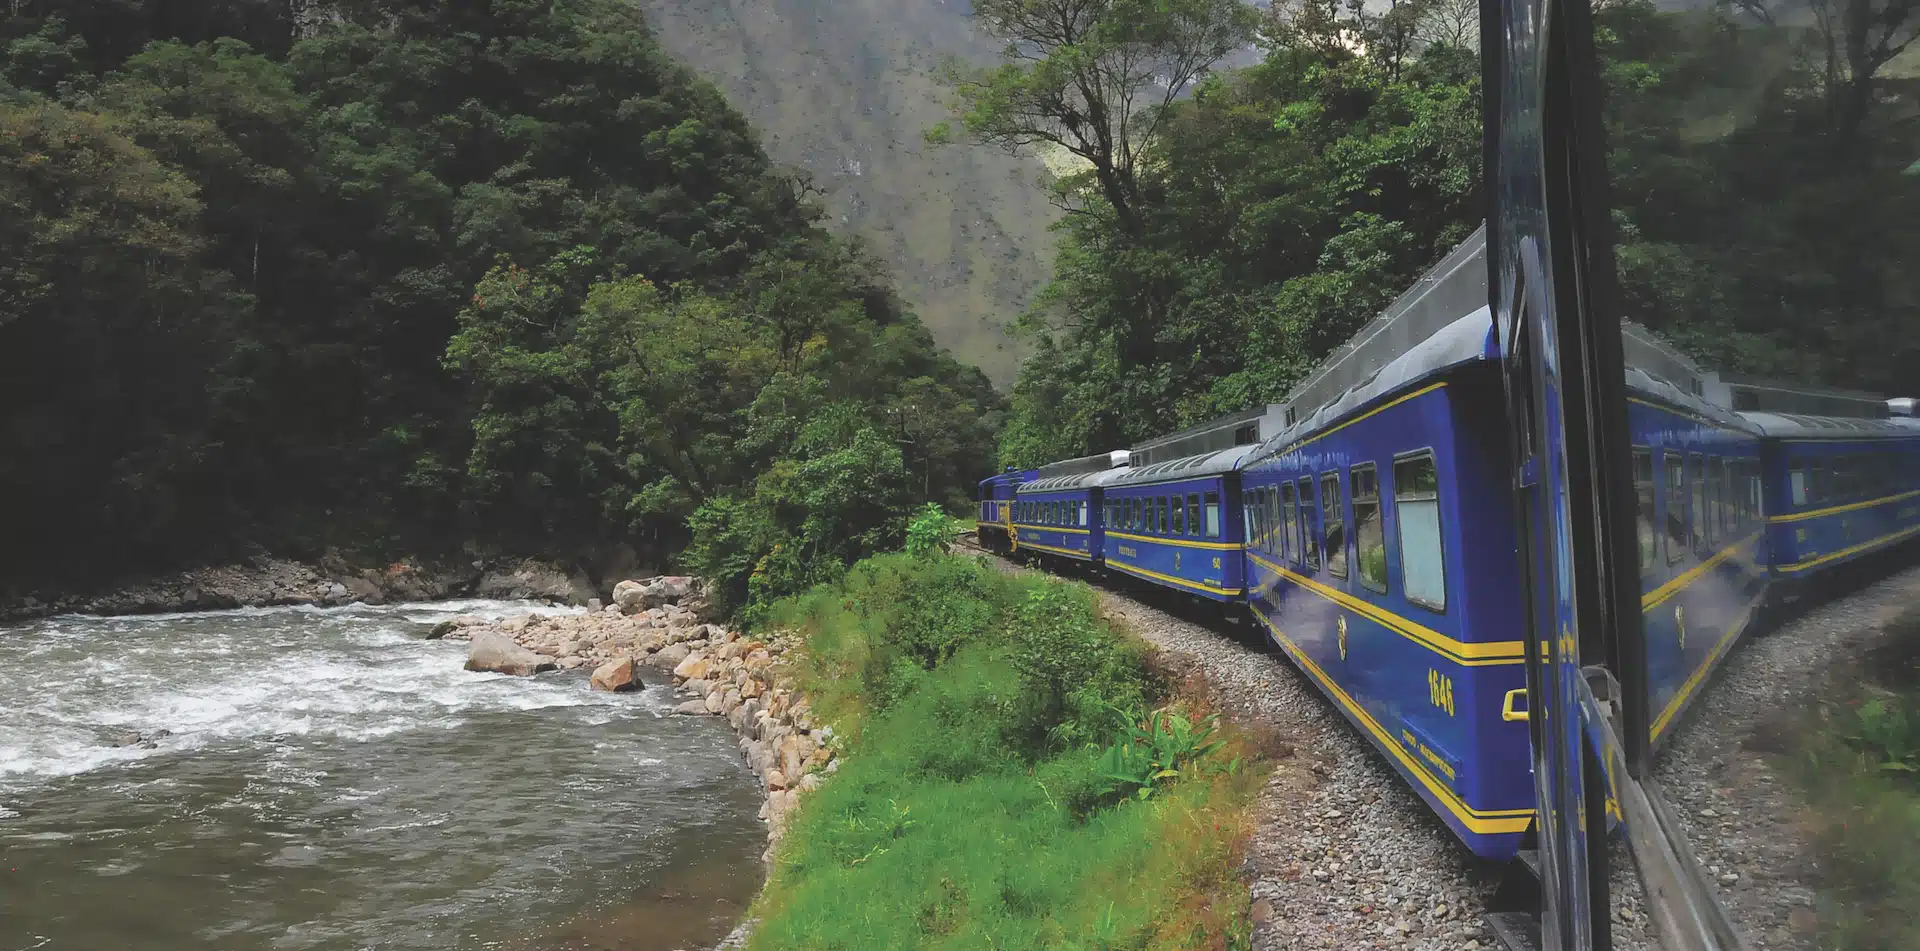 Peruvian train curving along the track amid mountains